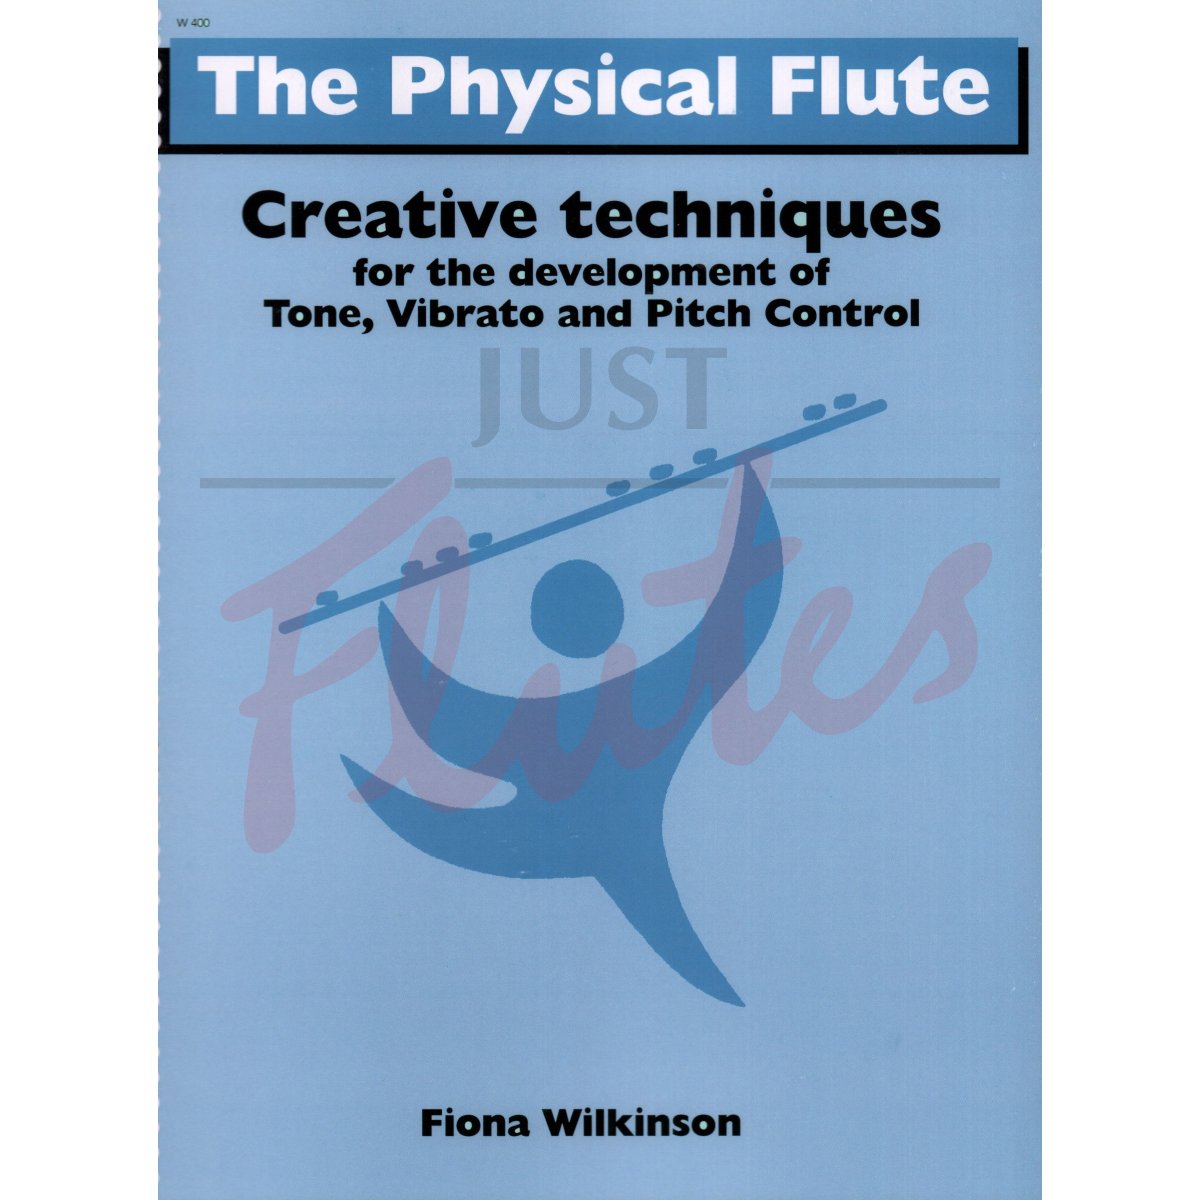 The Physical Flute